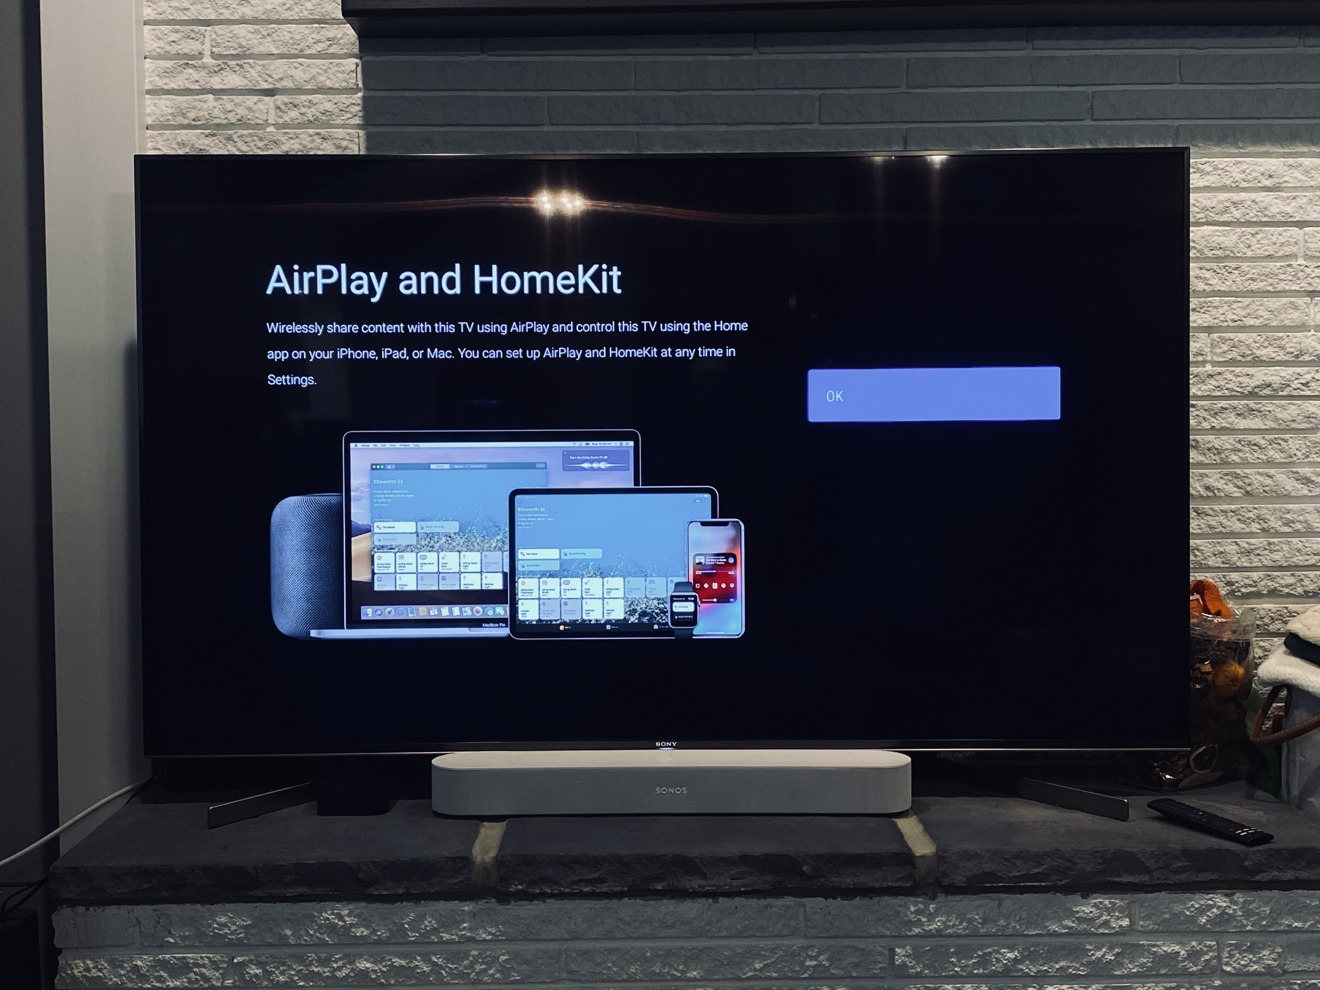 Hot And Airplay 2 On Sony Smart Tvs, Screen Mirroring Iphone To Sony Tv Not Working